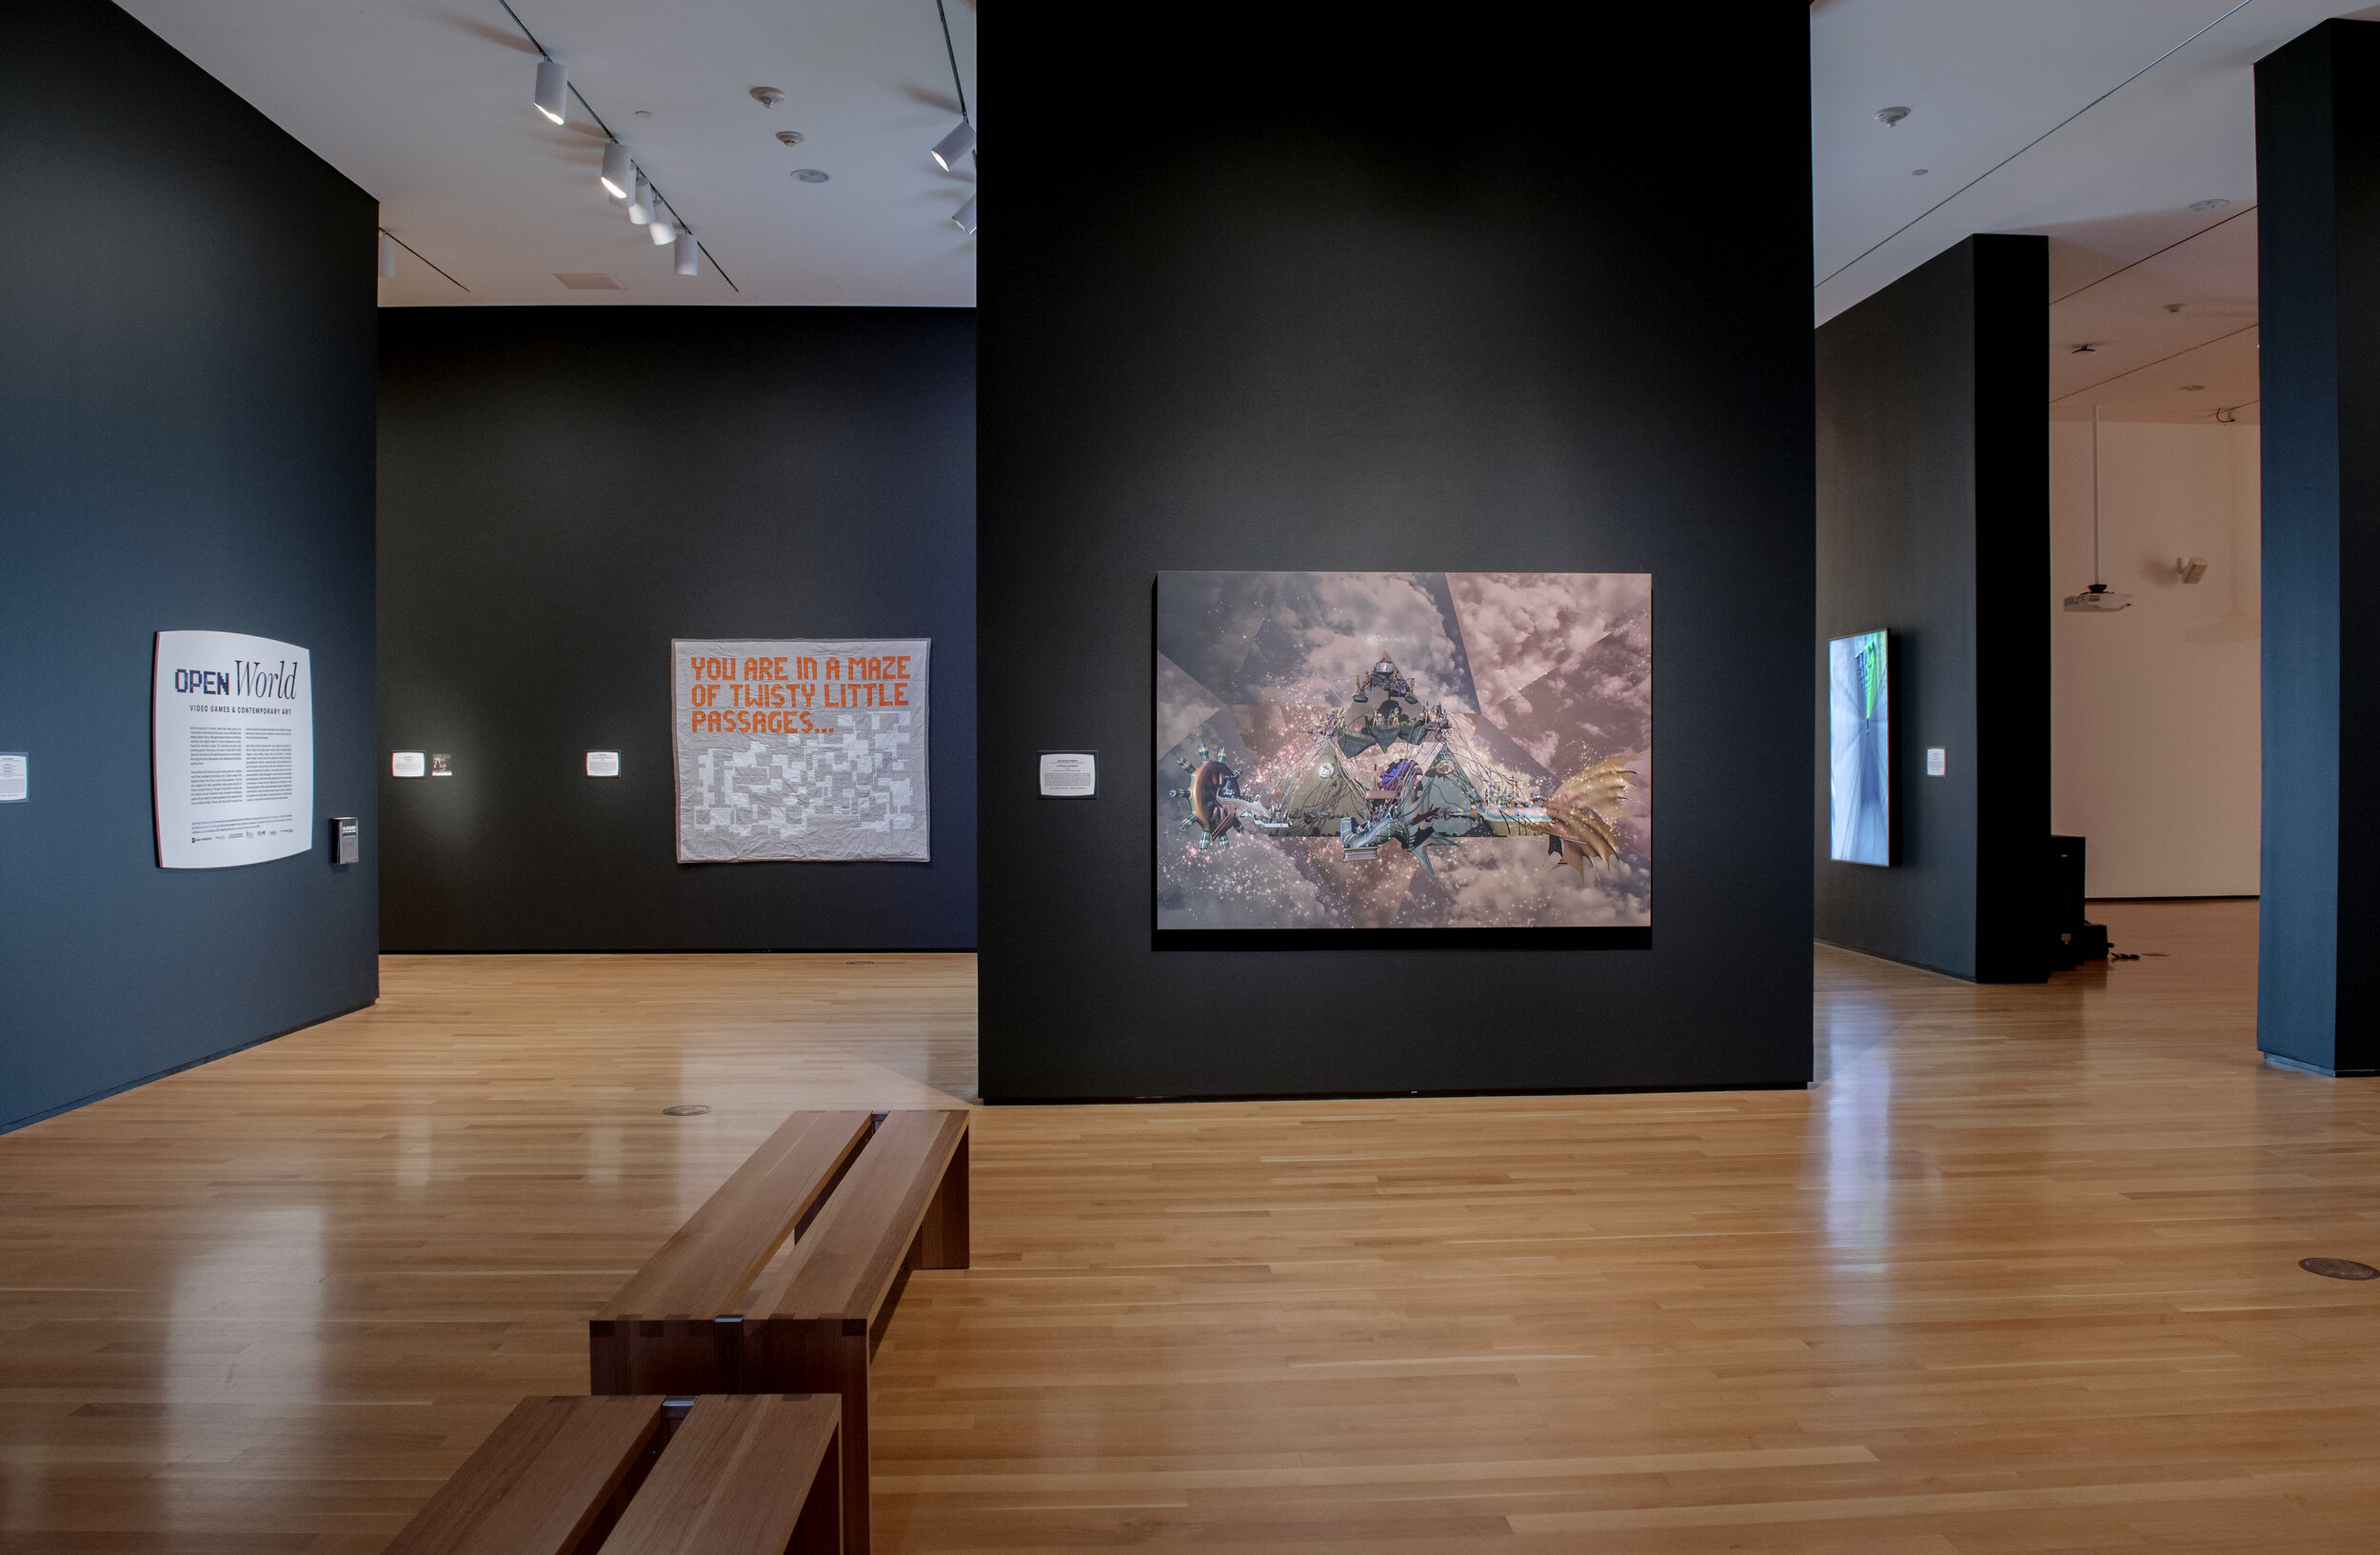 Installation View of Open World